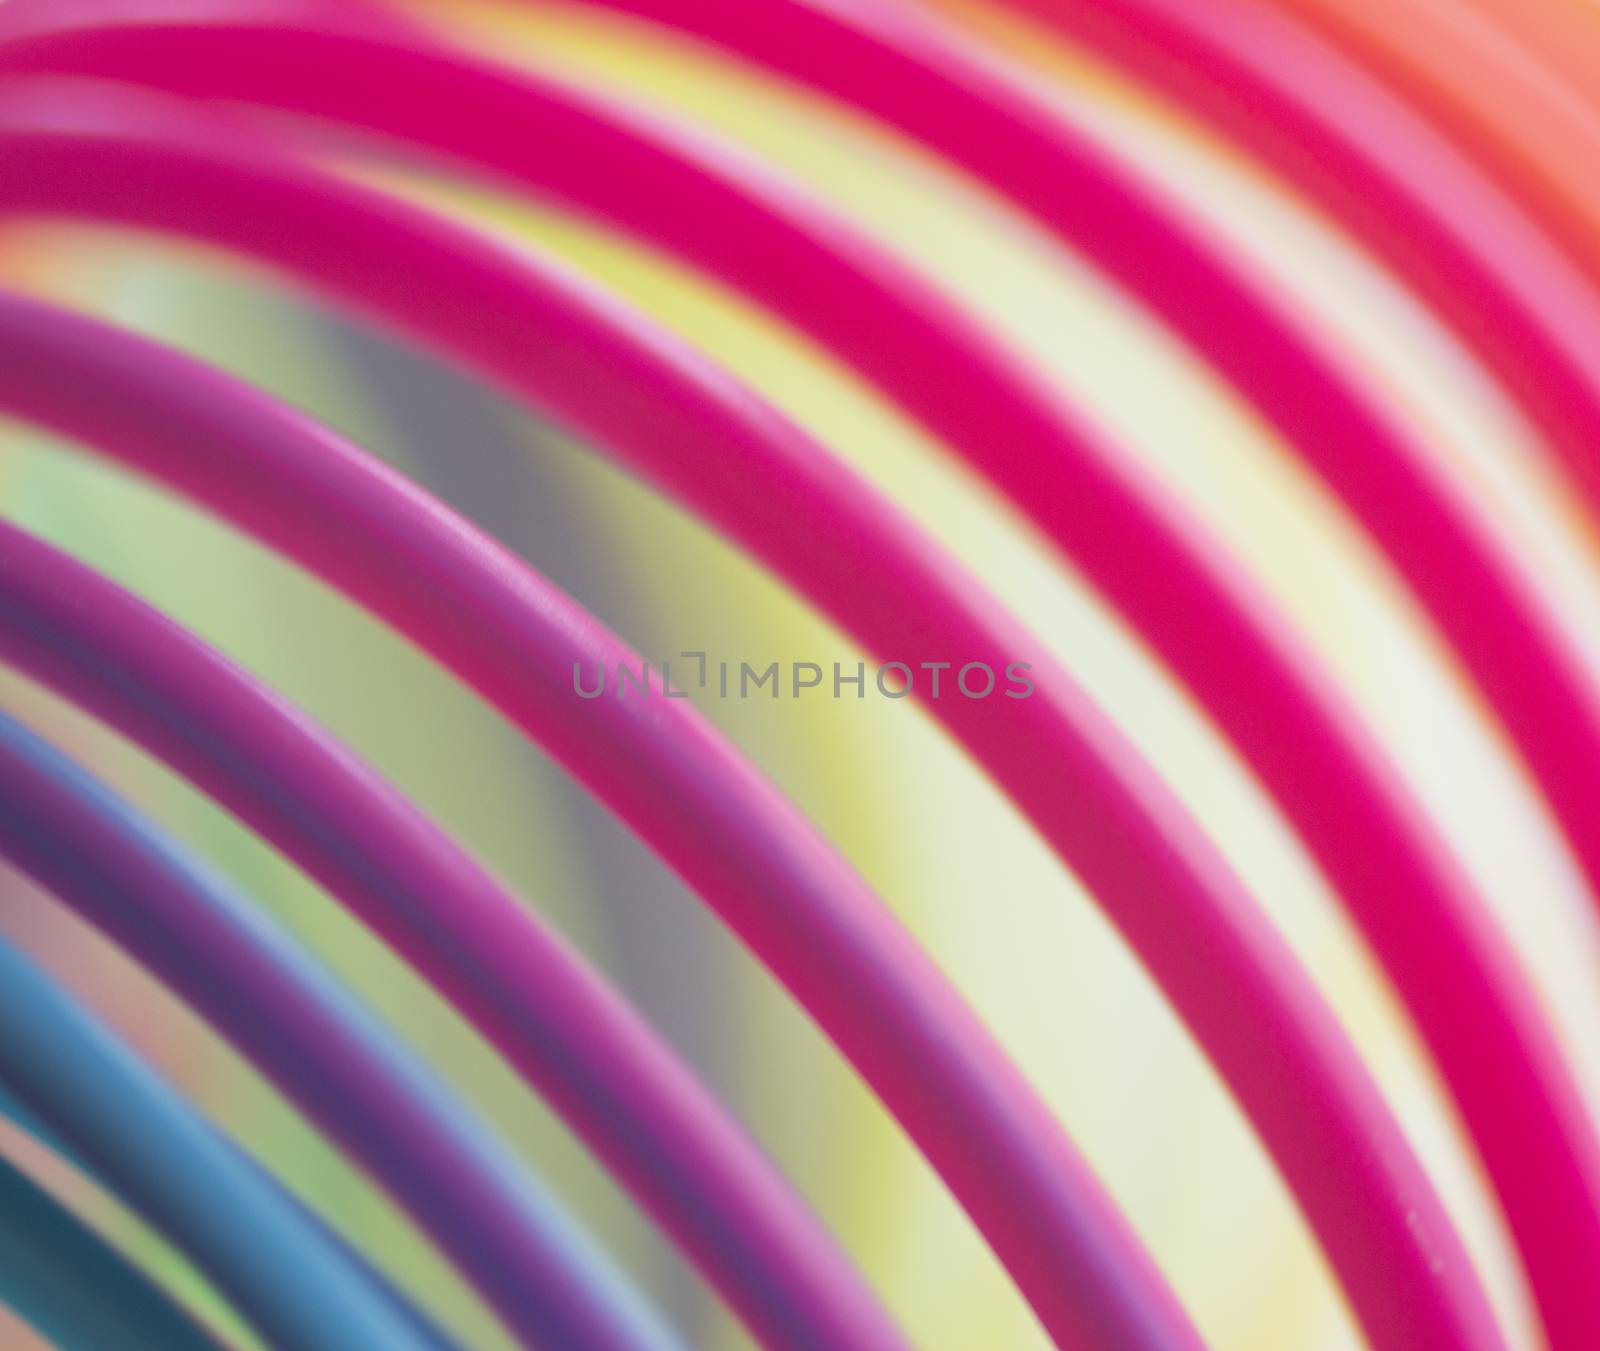 Colorful red color circular art swirl abstract circular round shapes.